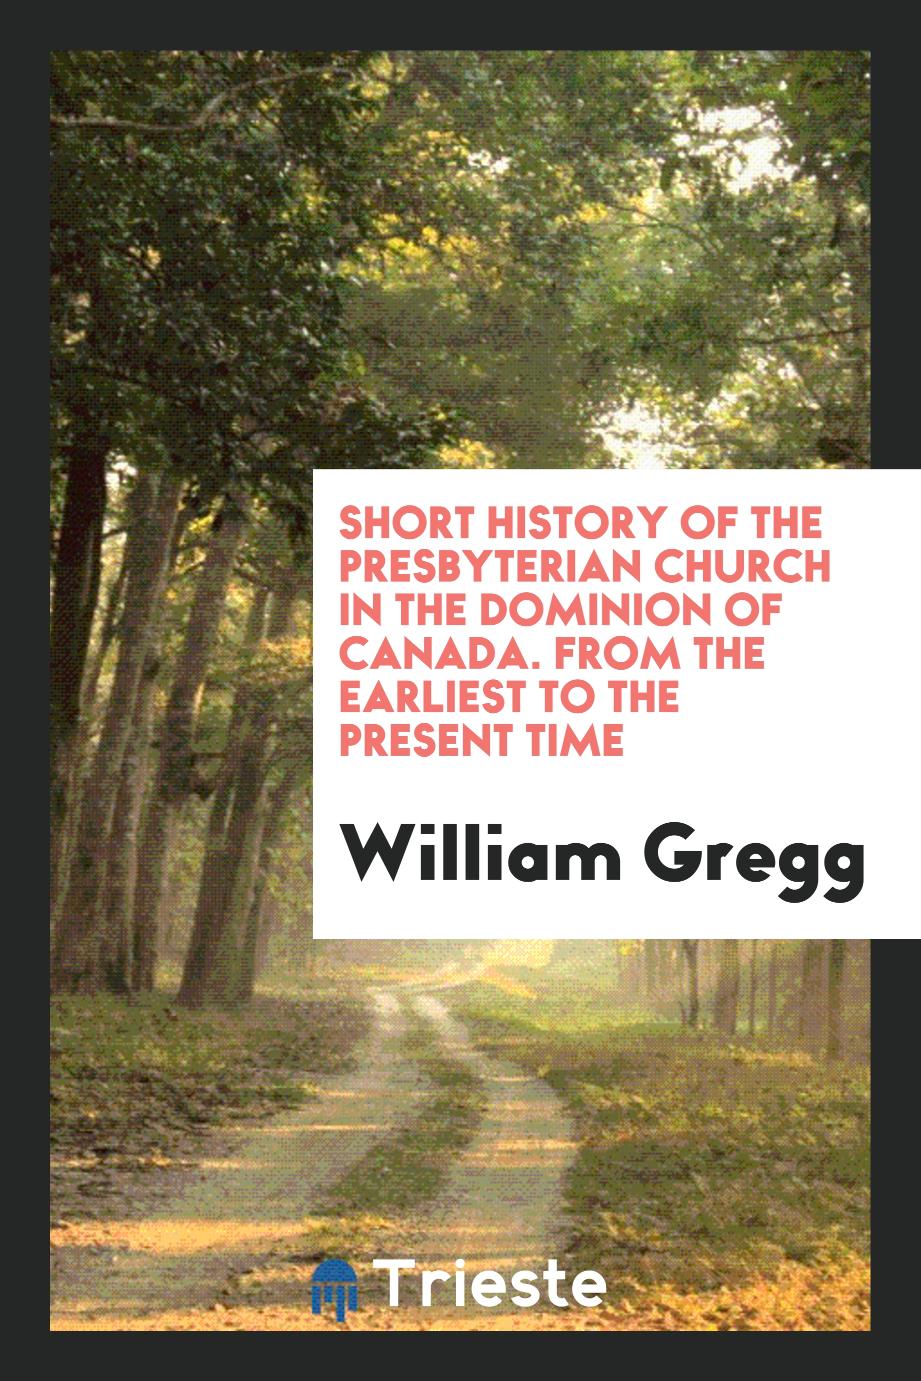 Short History of the Presbyterian Church in the Dominion of Canada. From the Earliest to the Present Time